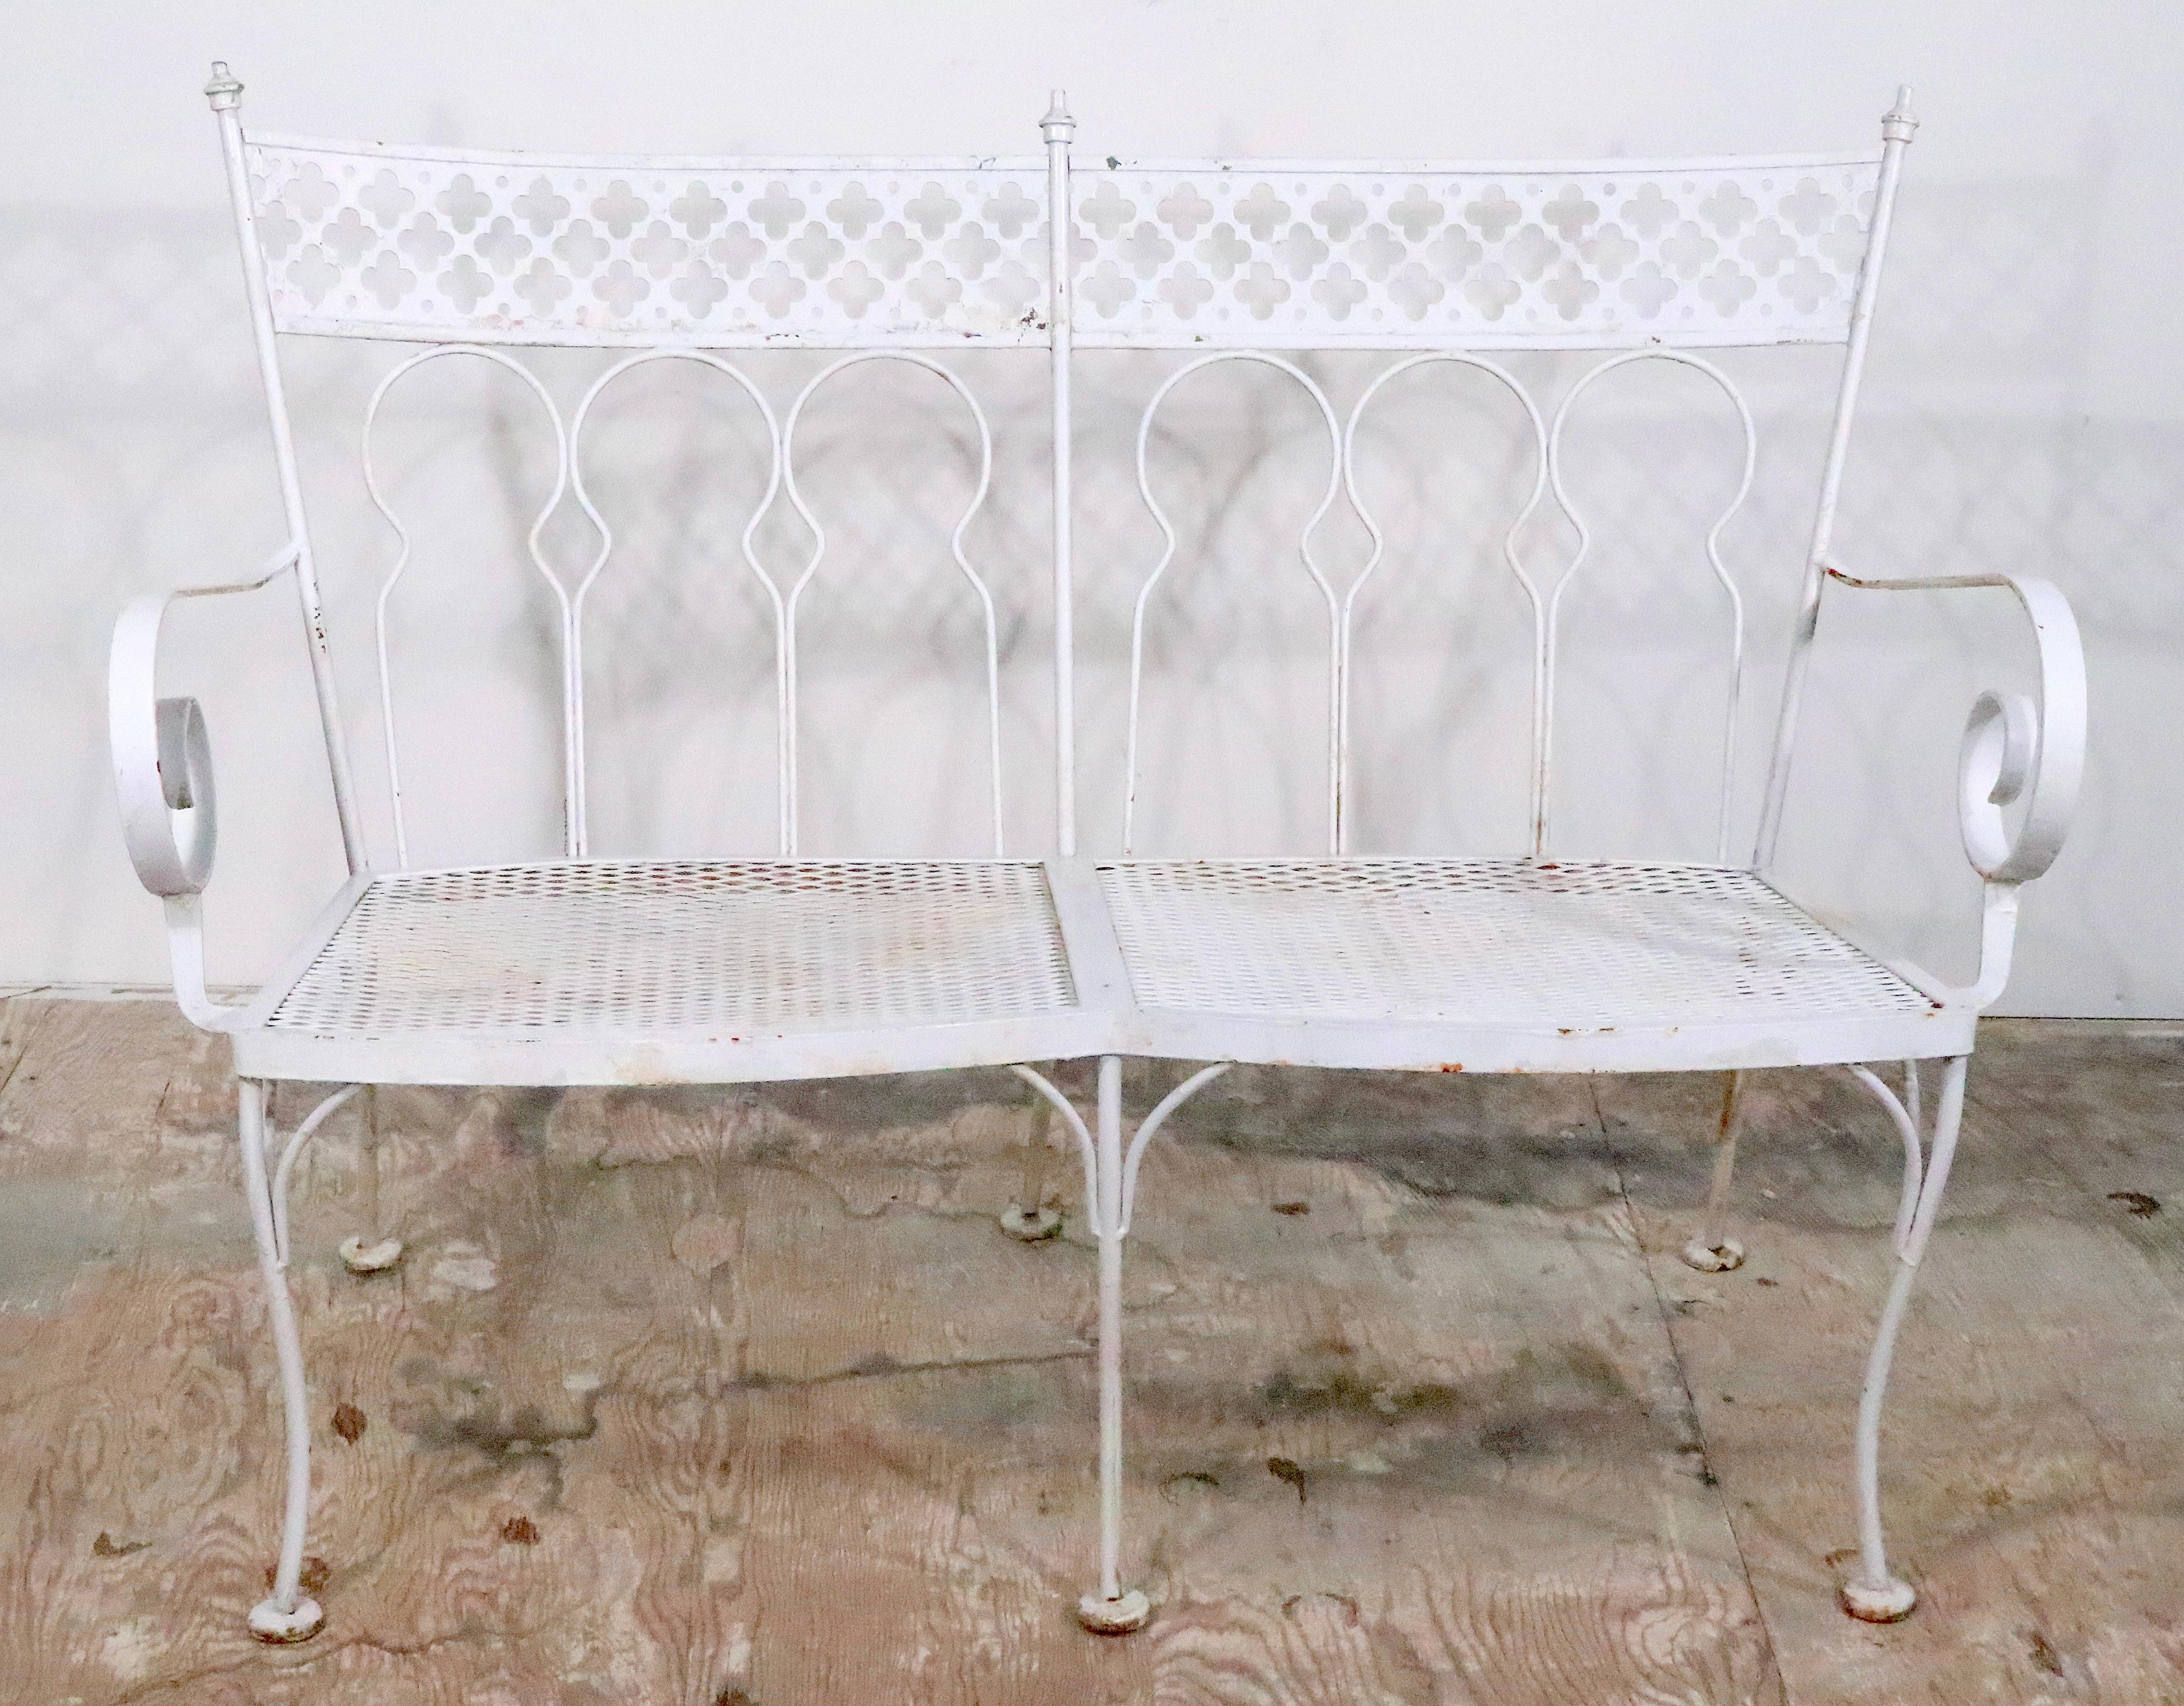 Rare Taj Mahal pattern garden, patio, poolside bench by Salterini. Constructed of wrought iron, cut steel, and metal mesh. The bench is in very good, vintage estate  condition, clean and ready to use. Currently in later, but not new, white paint